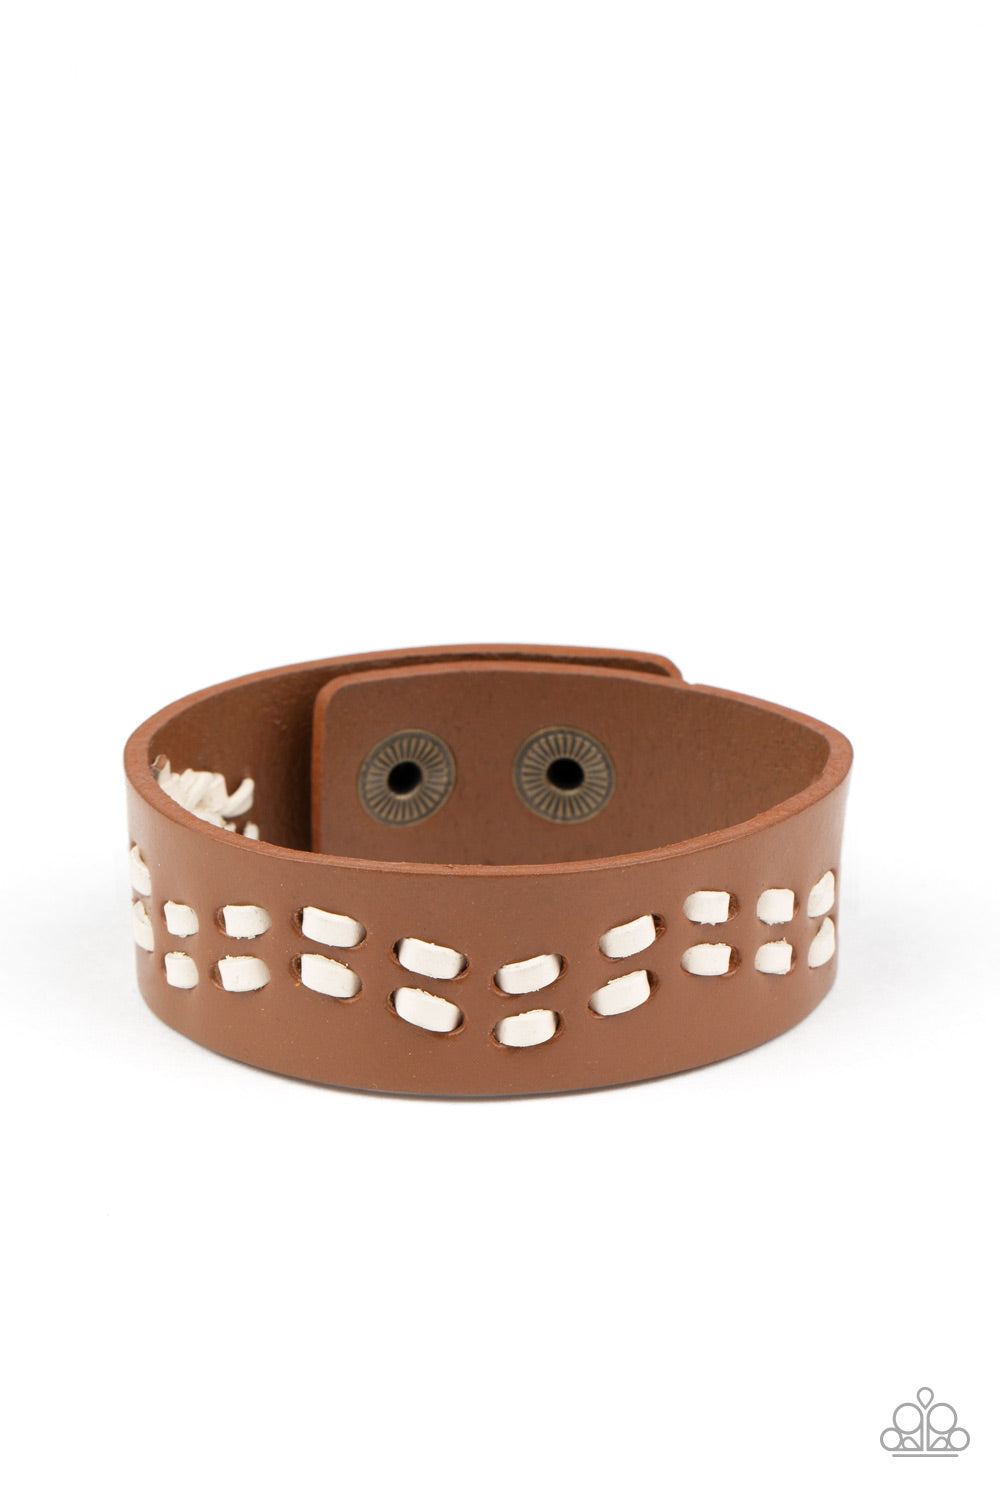 White leather cording is haphazardly laced through the center of a brown leather band, creating a rustic look around the wrist. Features an adjustable snap closure.